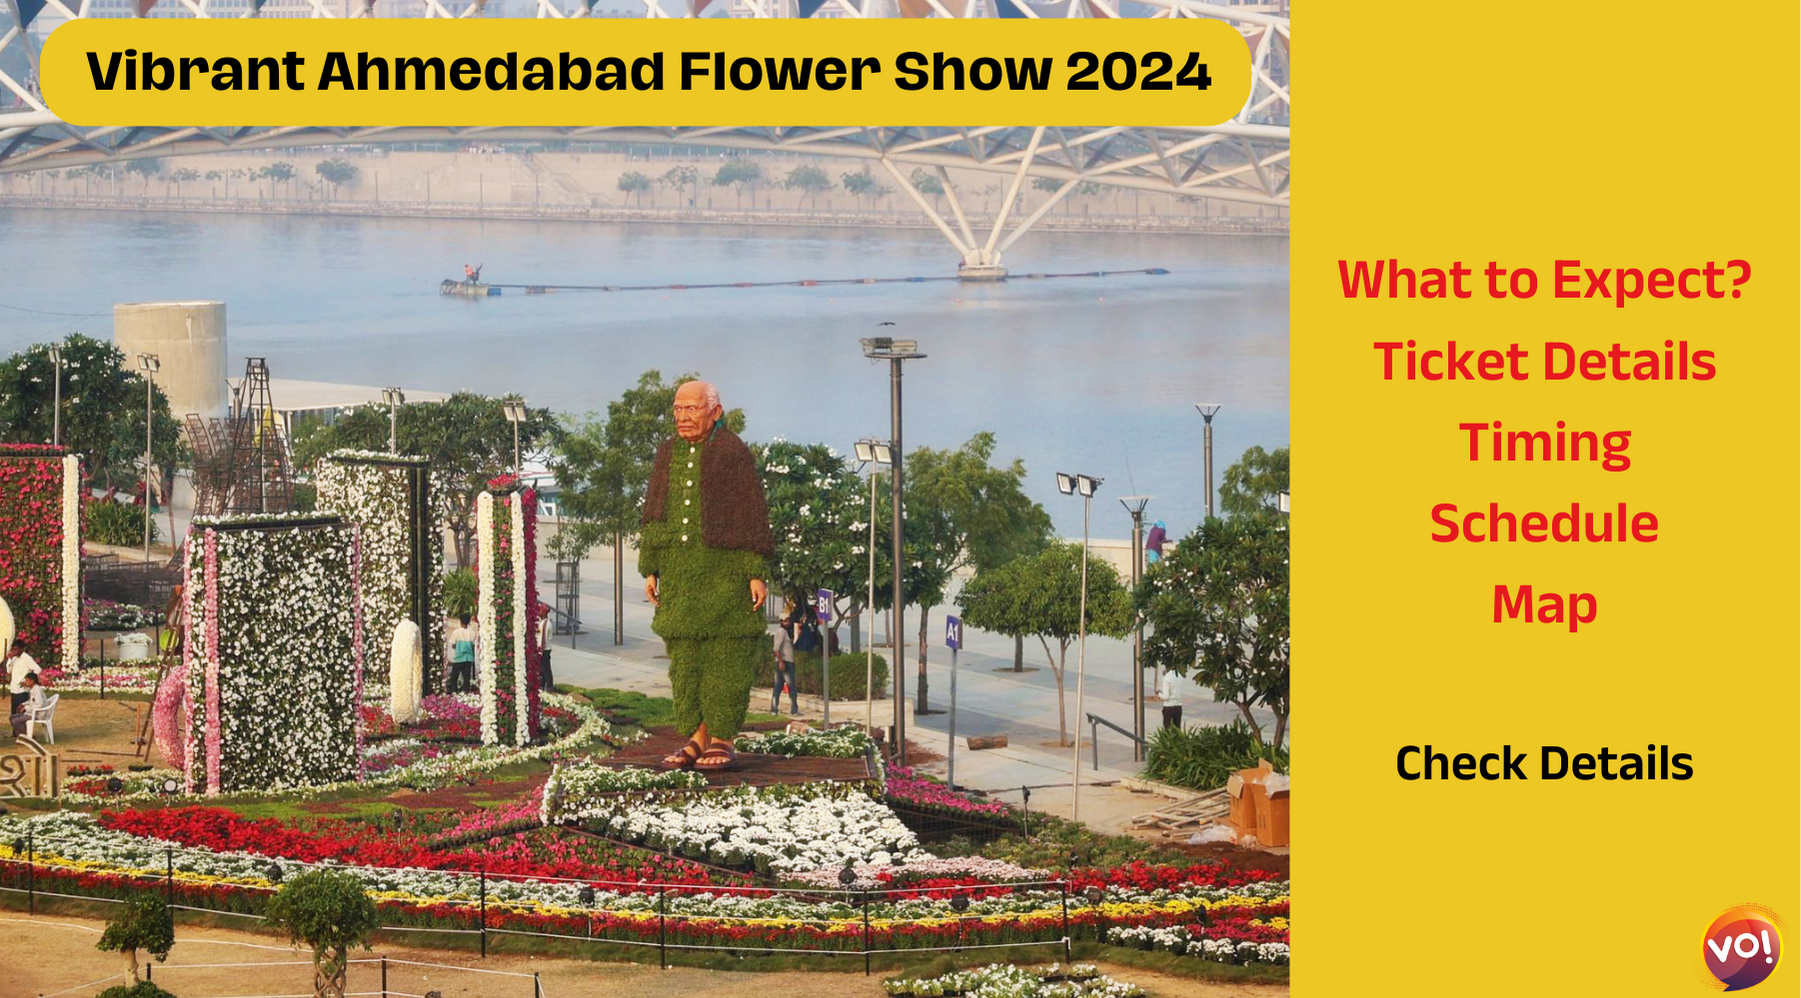 Ahmedabad Flower Show 2024 is a grand exhibition of flowers and sculptures at the Sabarmati Riverfront, with tickets available online and offline.